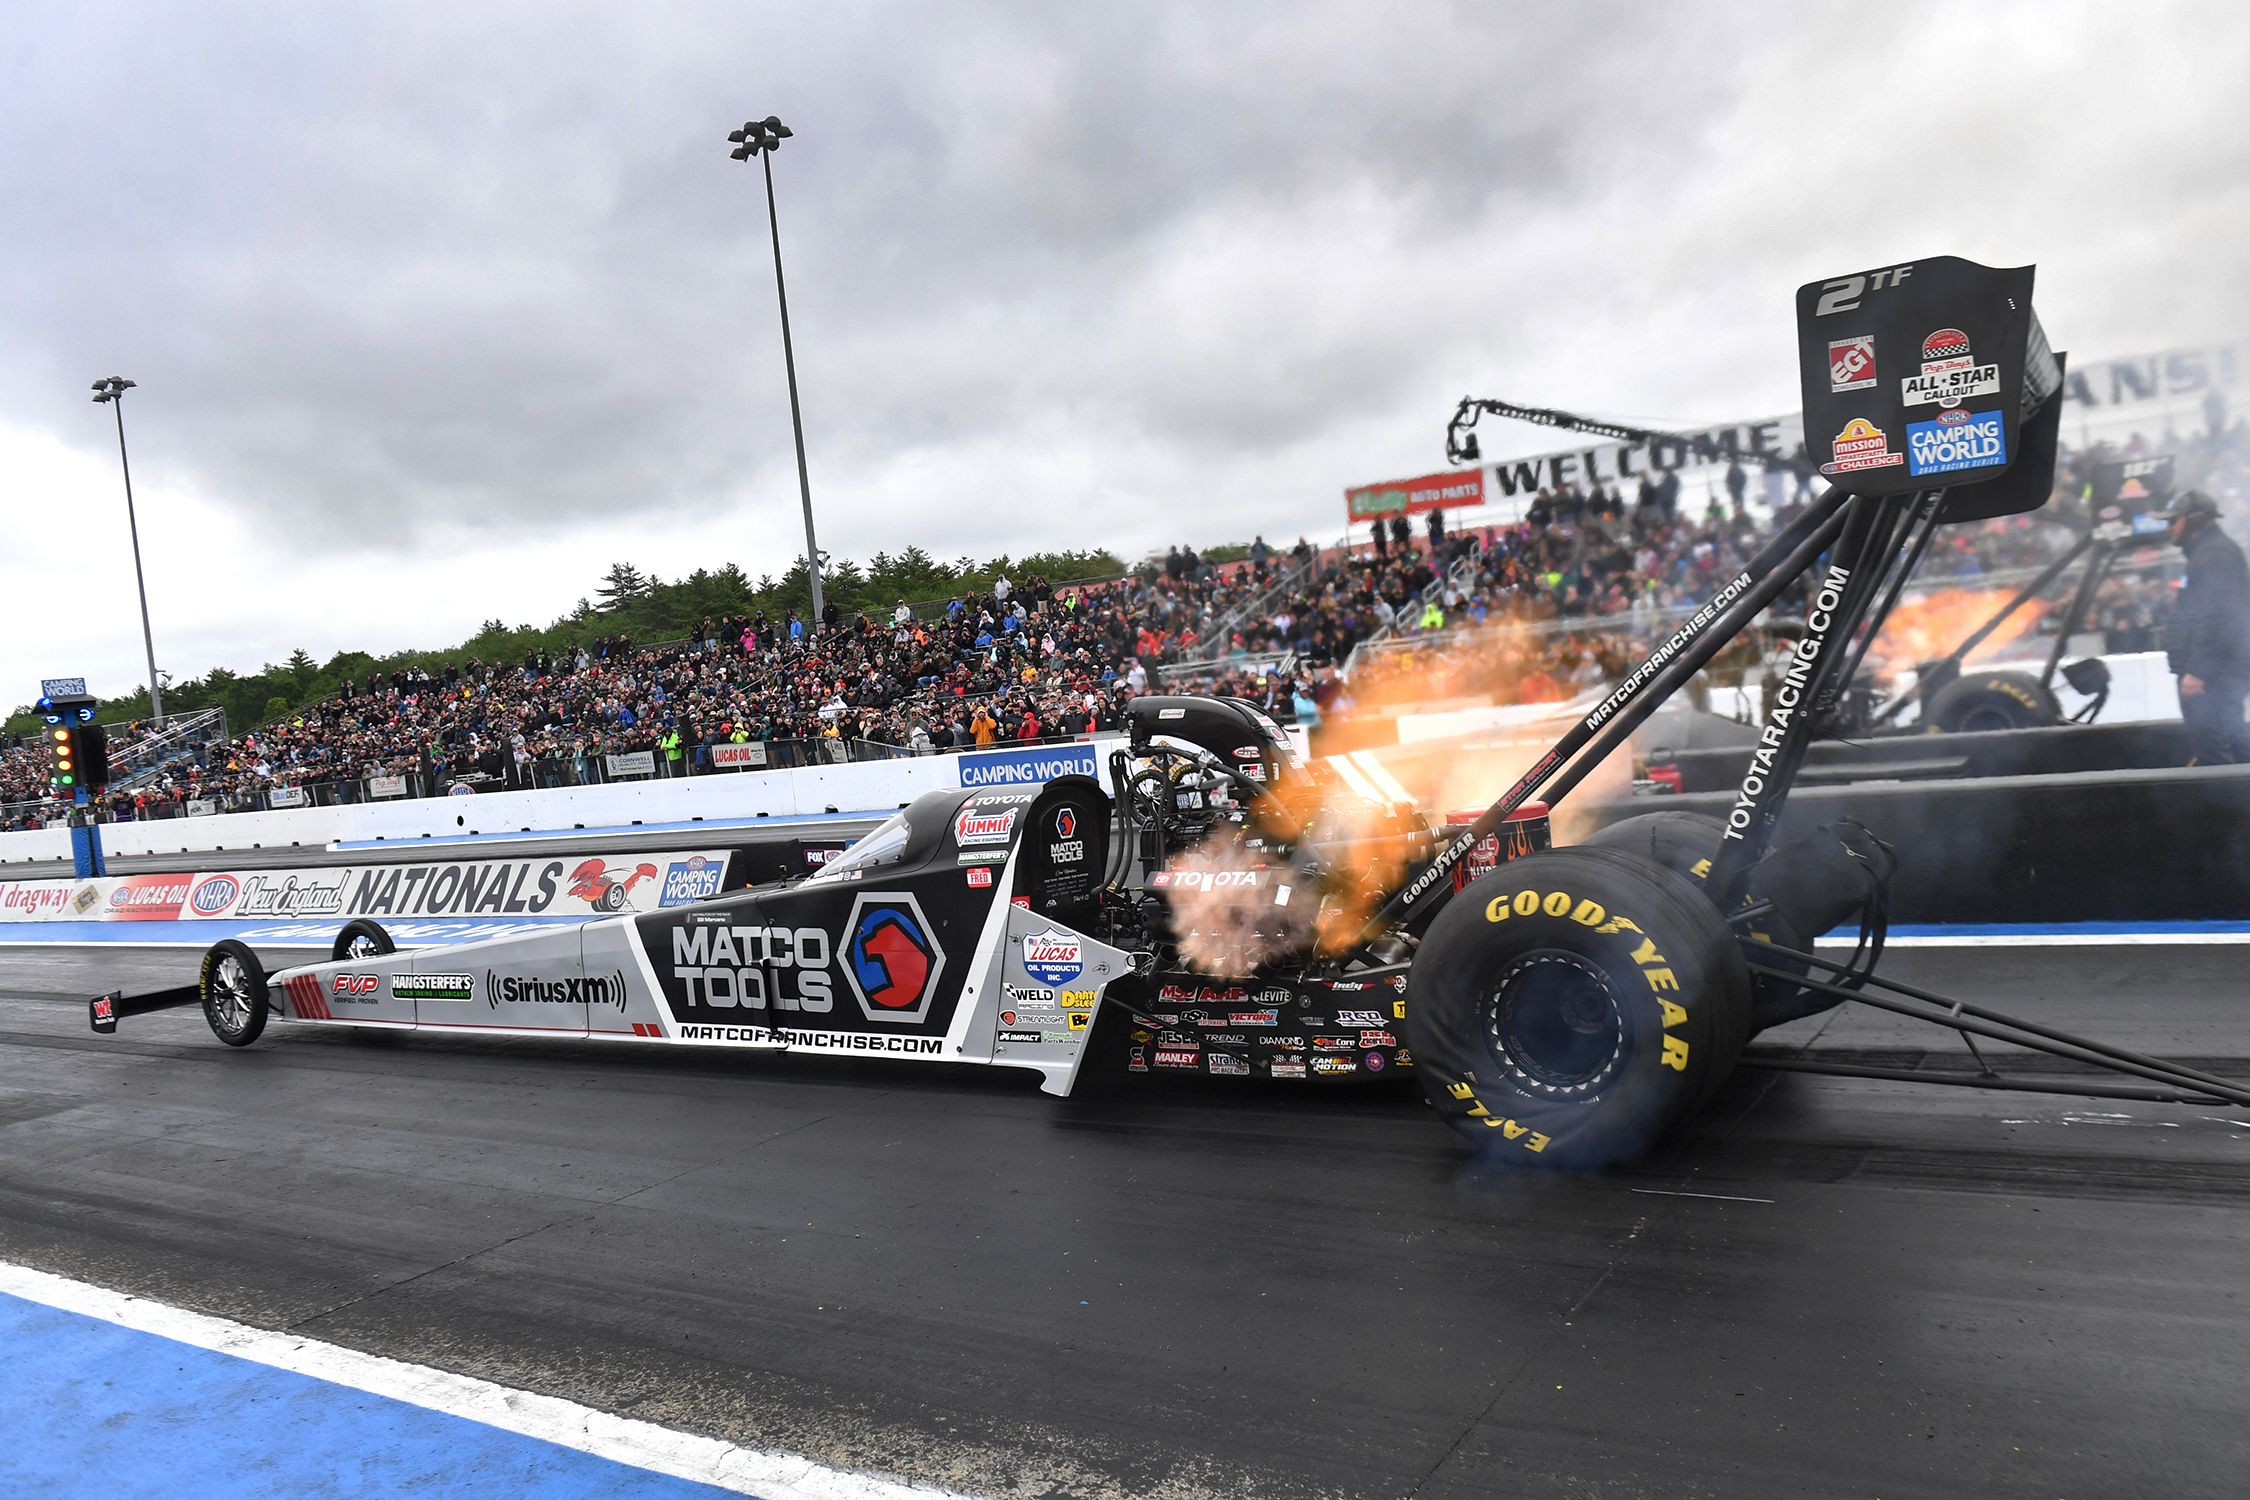 Antron Brown clinches third NHRA Top Fuel championship